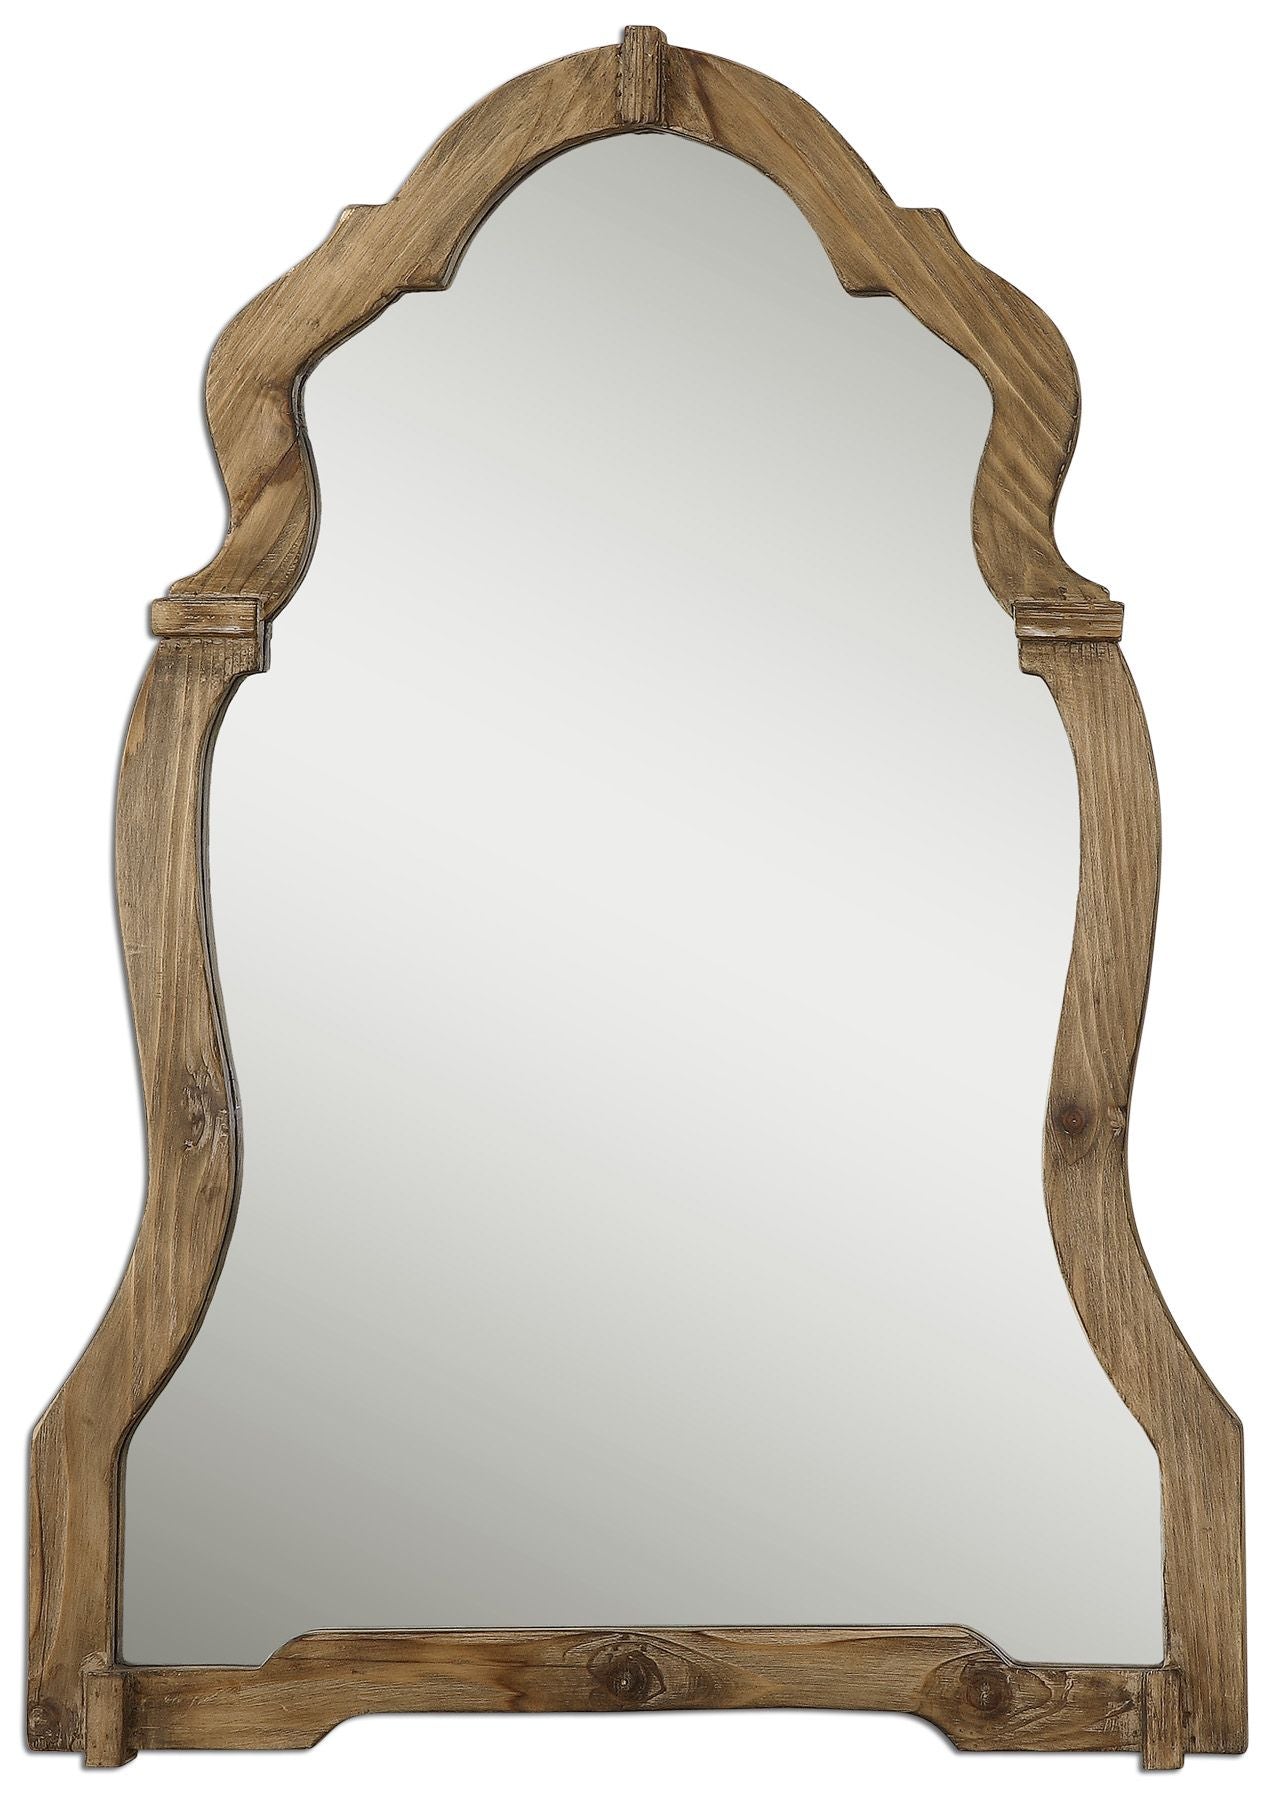 This Ornate Mirror Features A Light, Walnut Stained Wood Frame With Burnished Details.